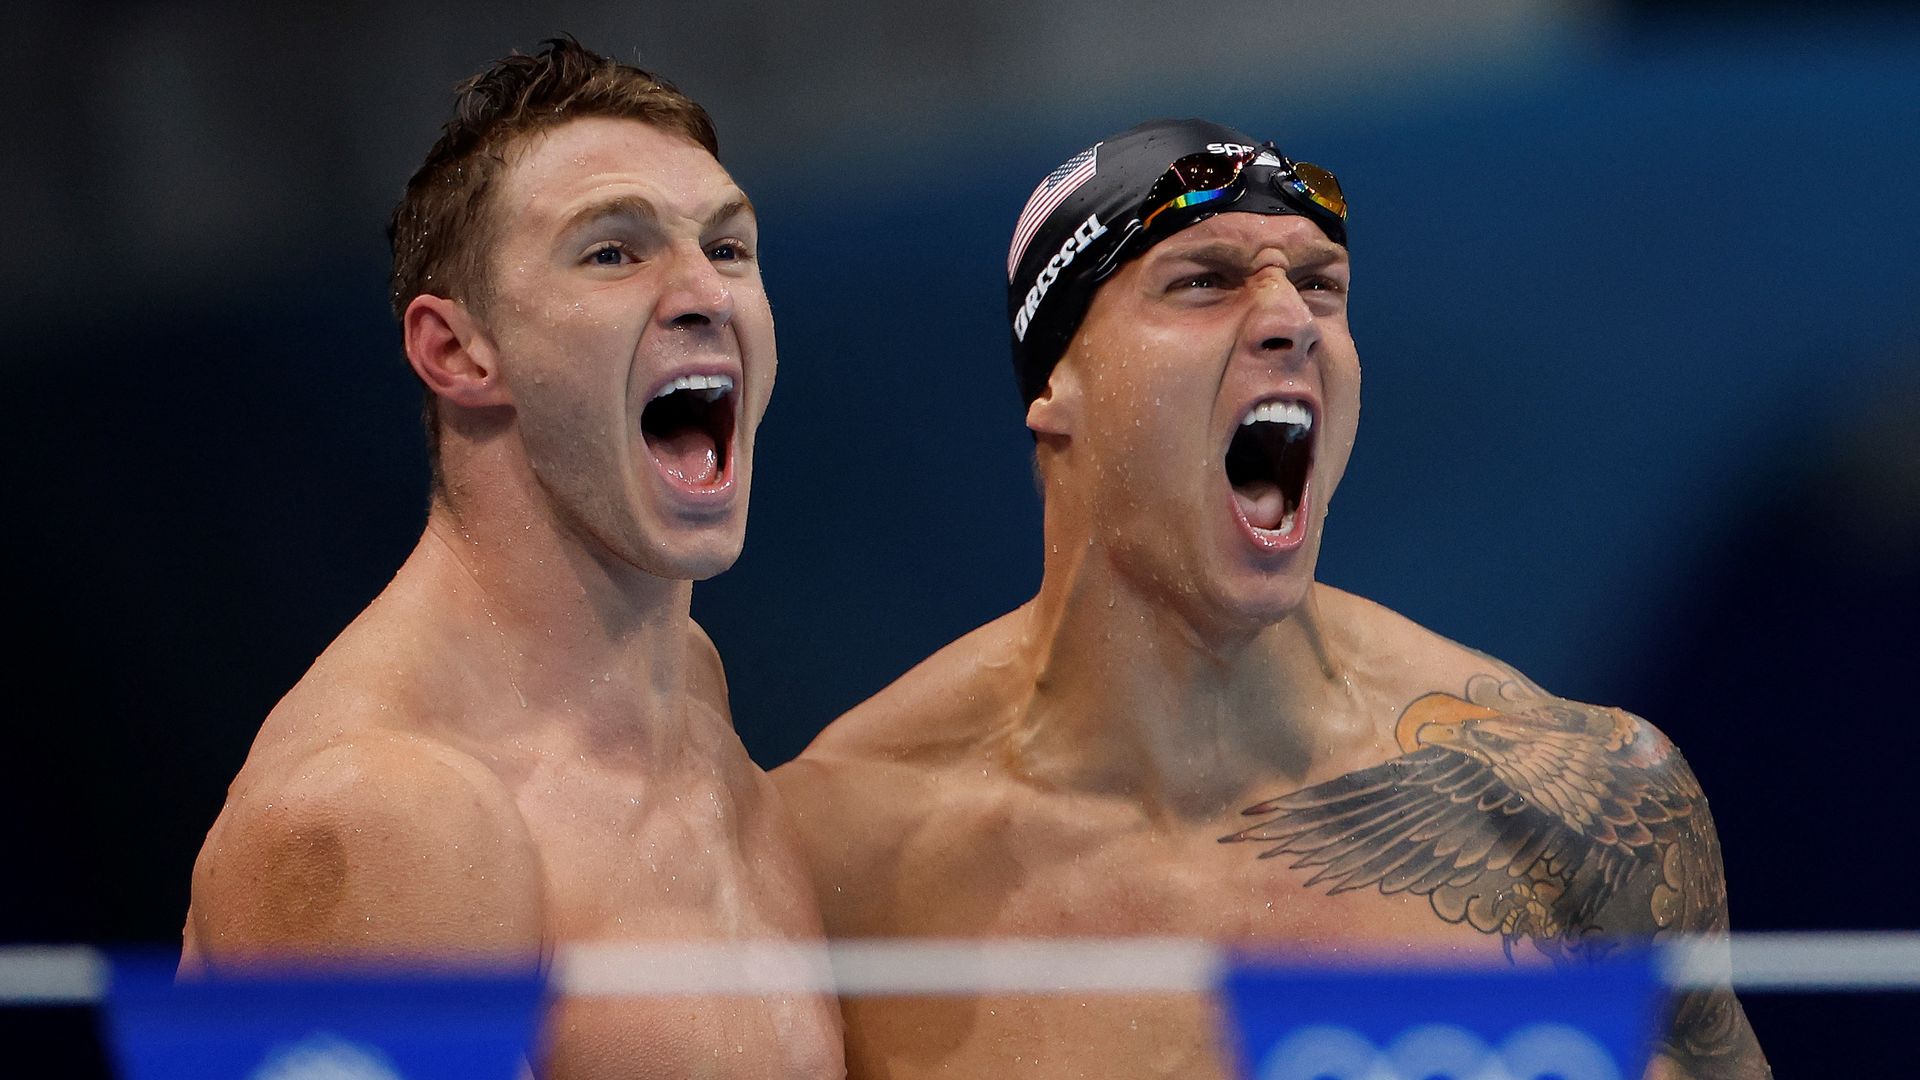 USA's Ryan Murphy (L) andCaeleb Dressel celebrate winning the final of the men's 4x100m medley relay swimming event during the Tokyo 2020 Olympic Games